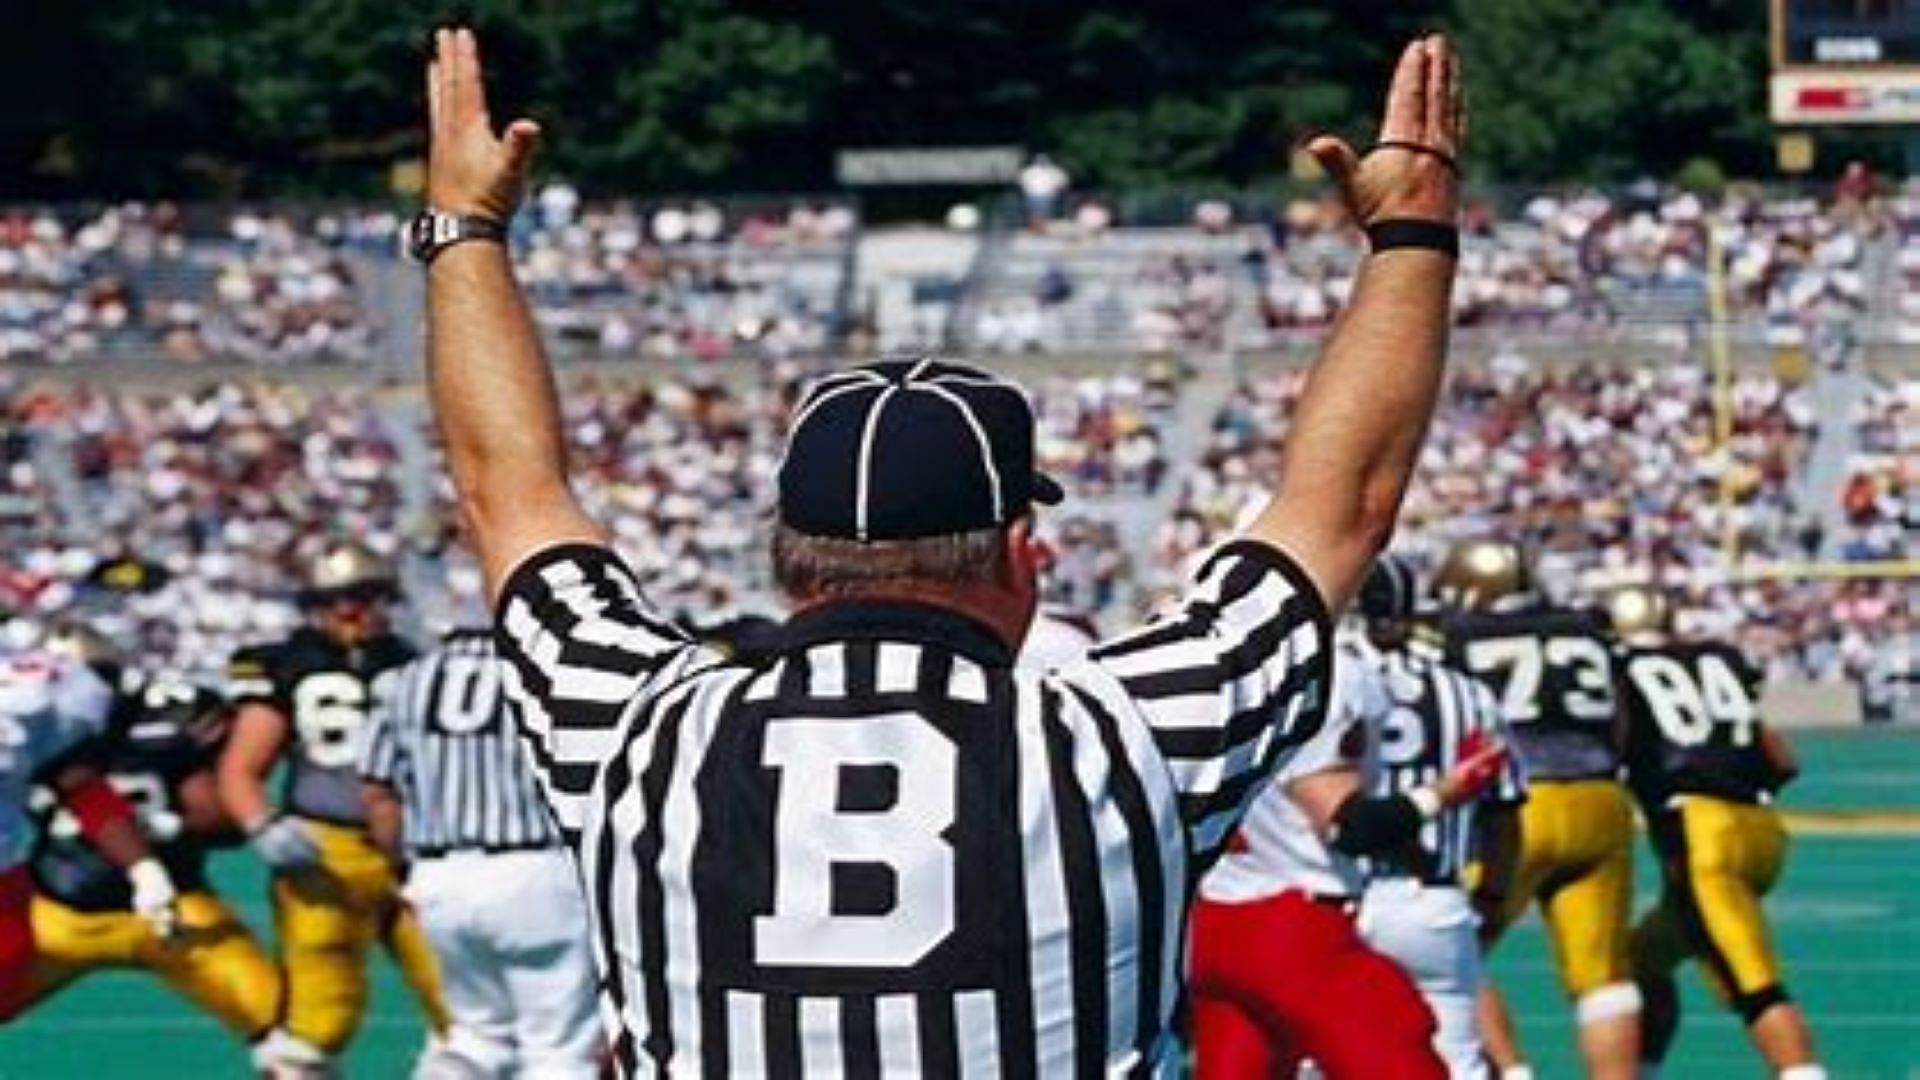 Football back judge signals for a touchdown